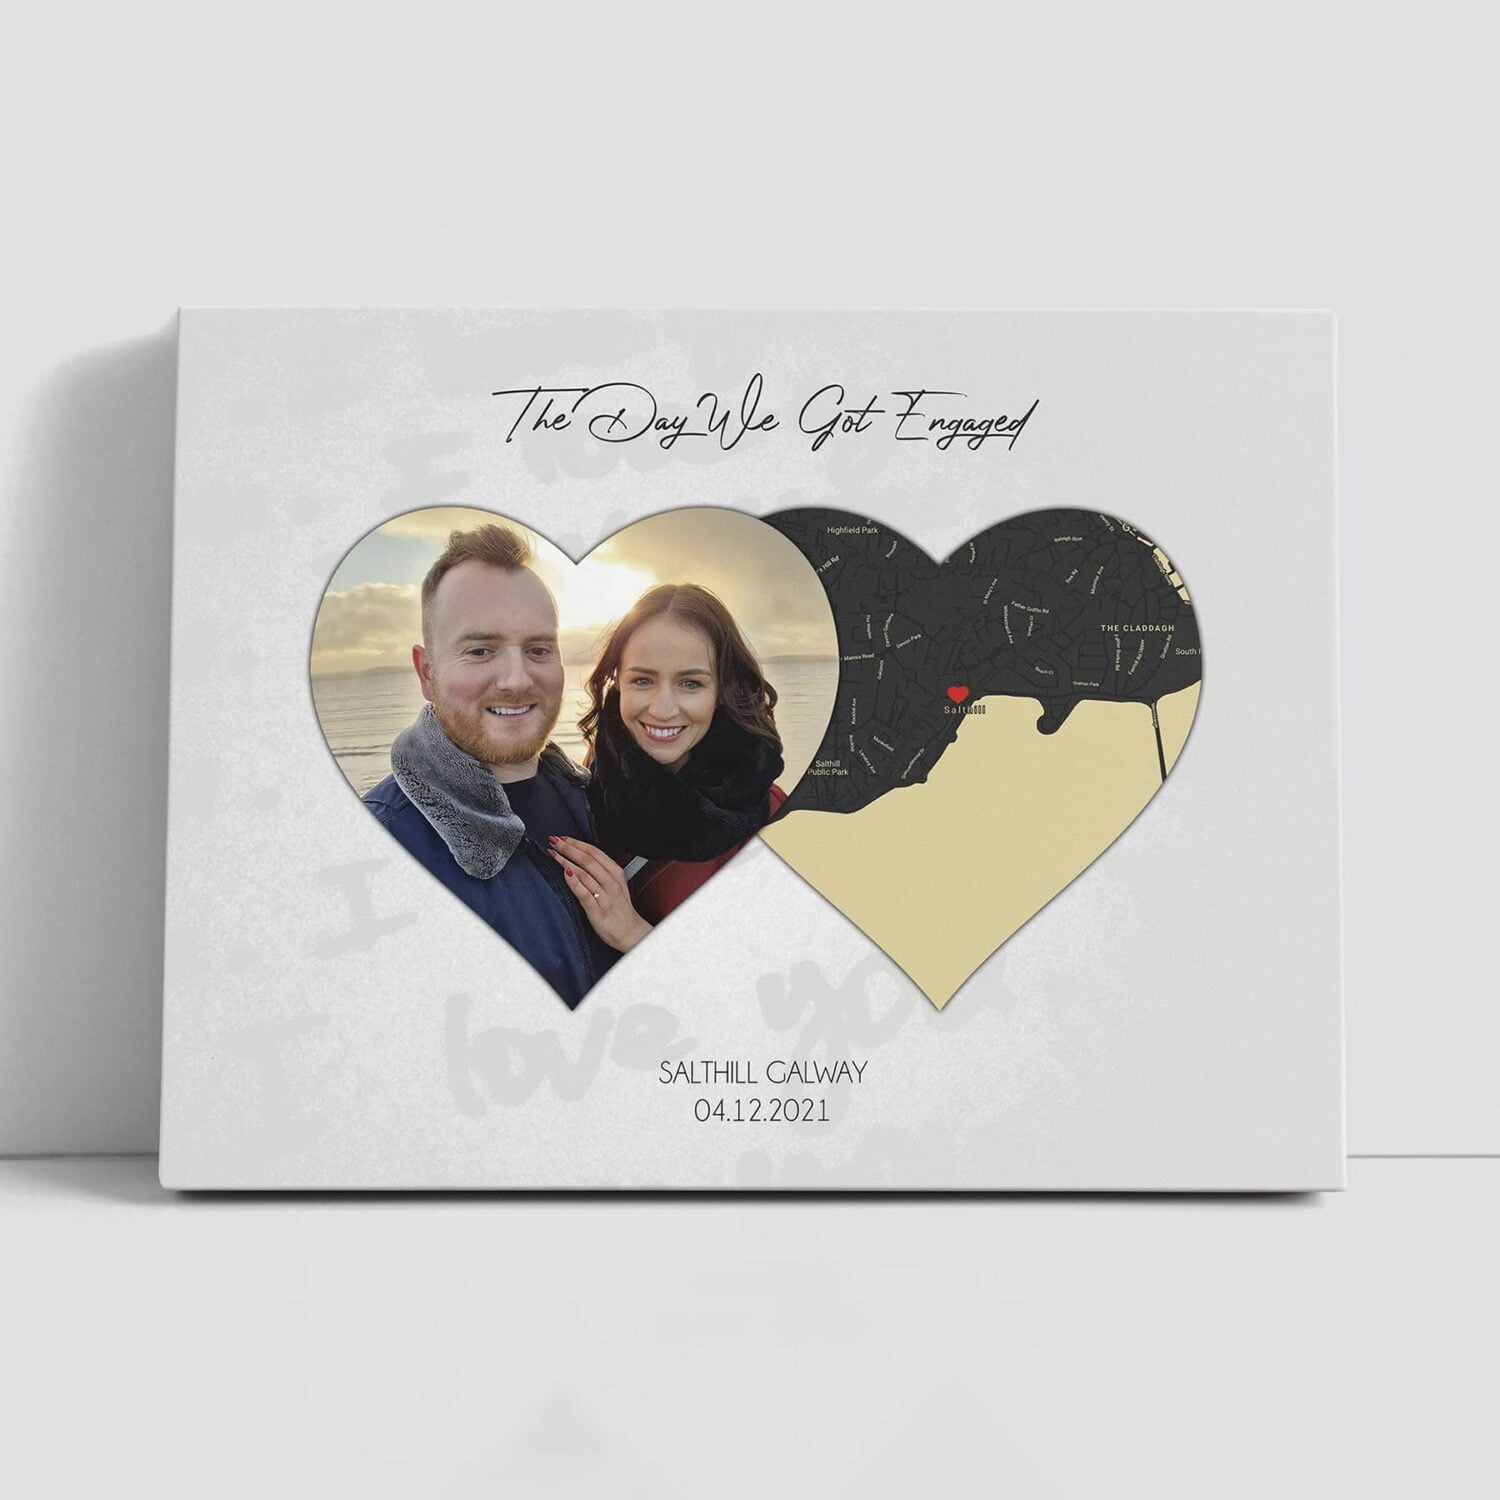 The Day We Got Engaged is a personalised canvas that features one photo of the loving couple and one photo map of the location of the engagement.